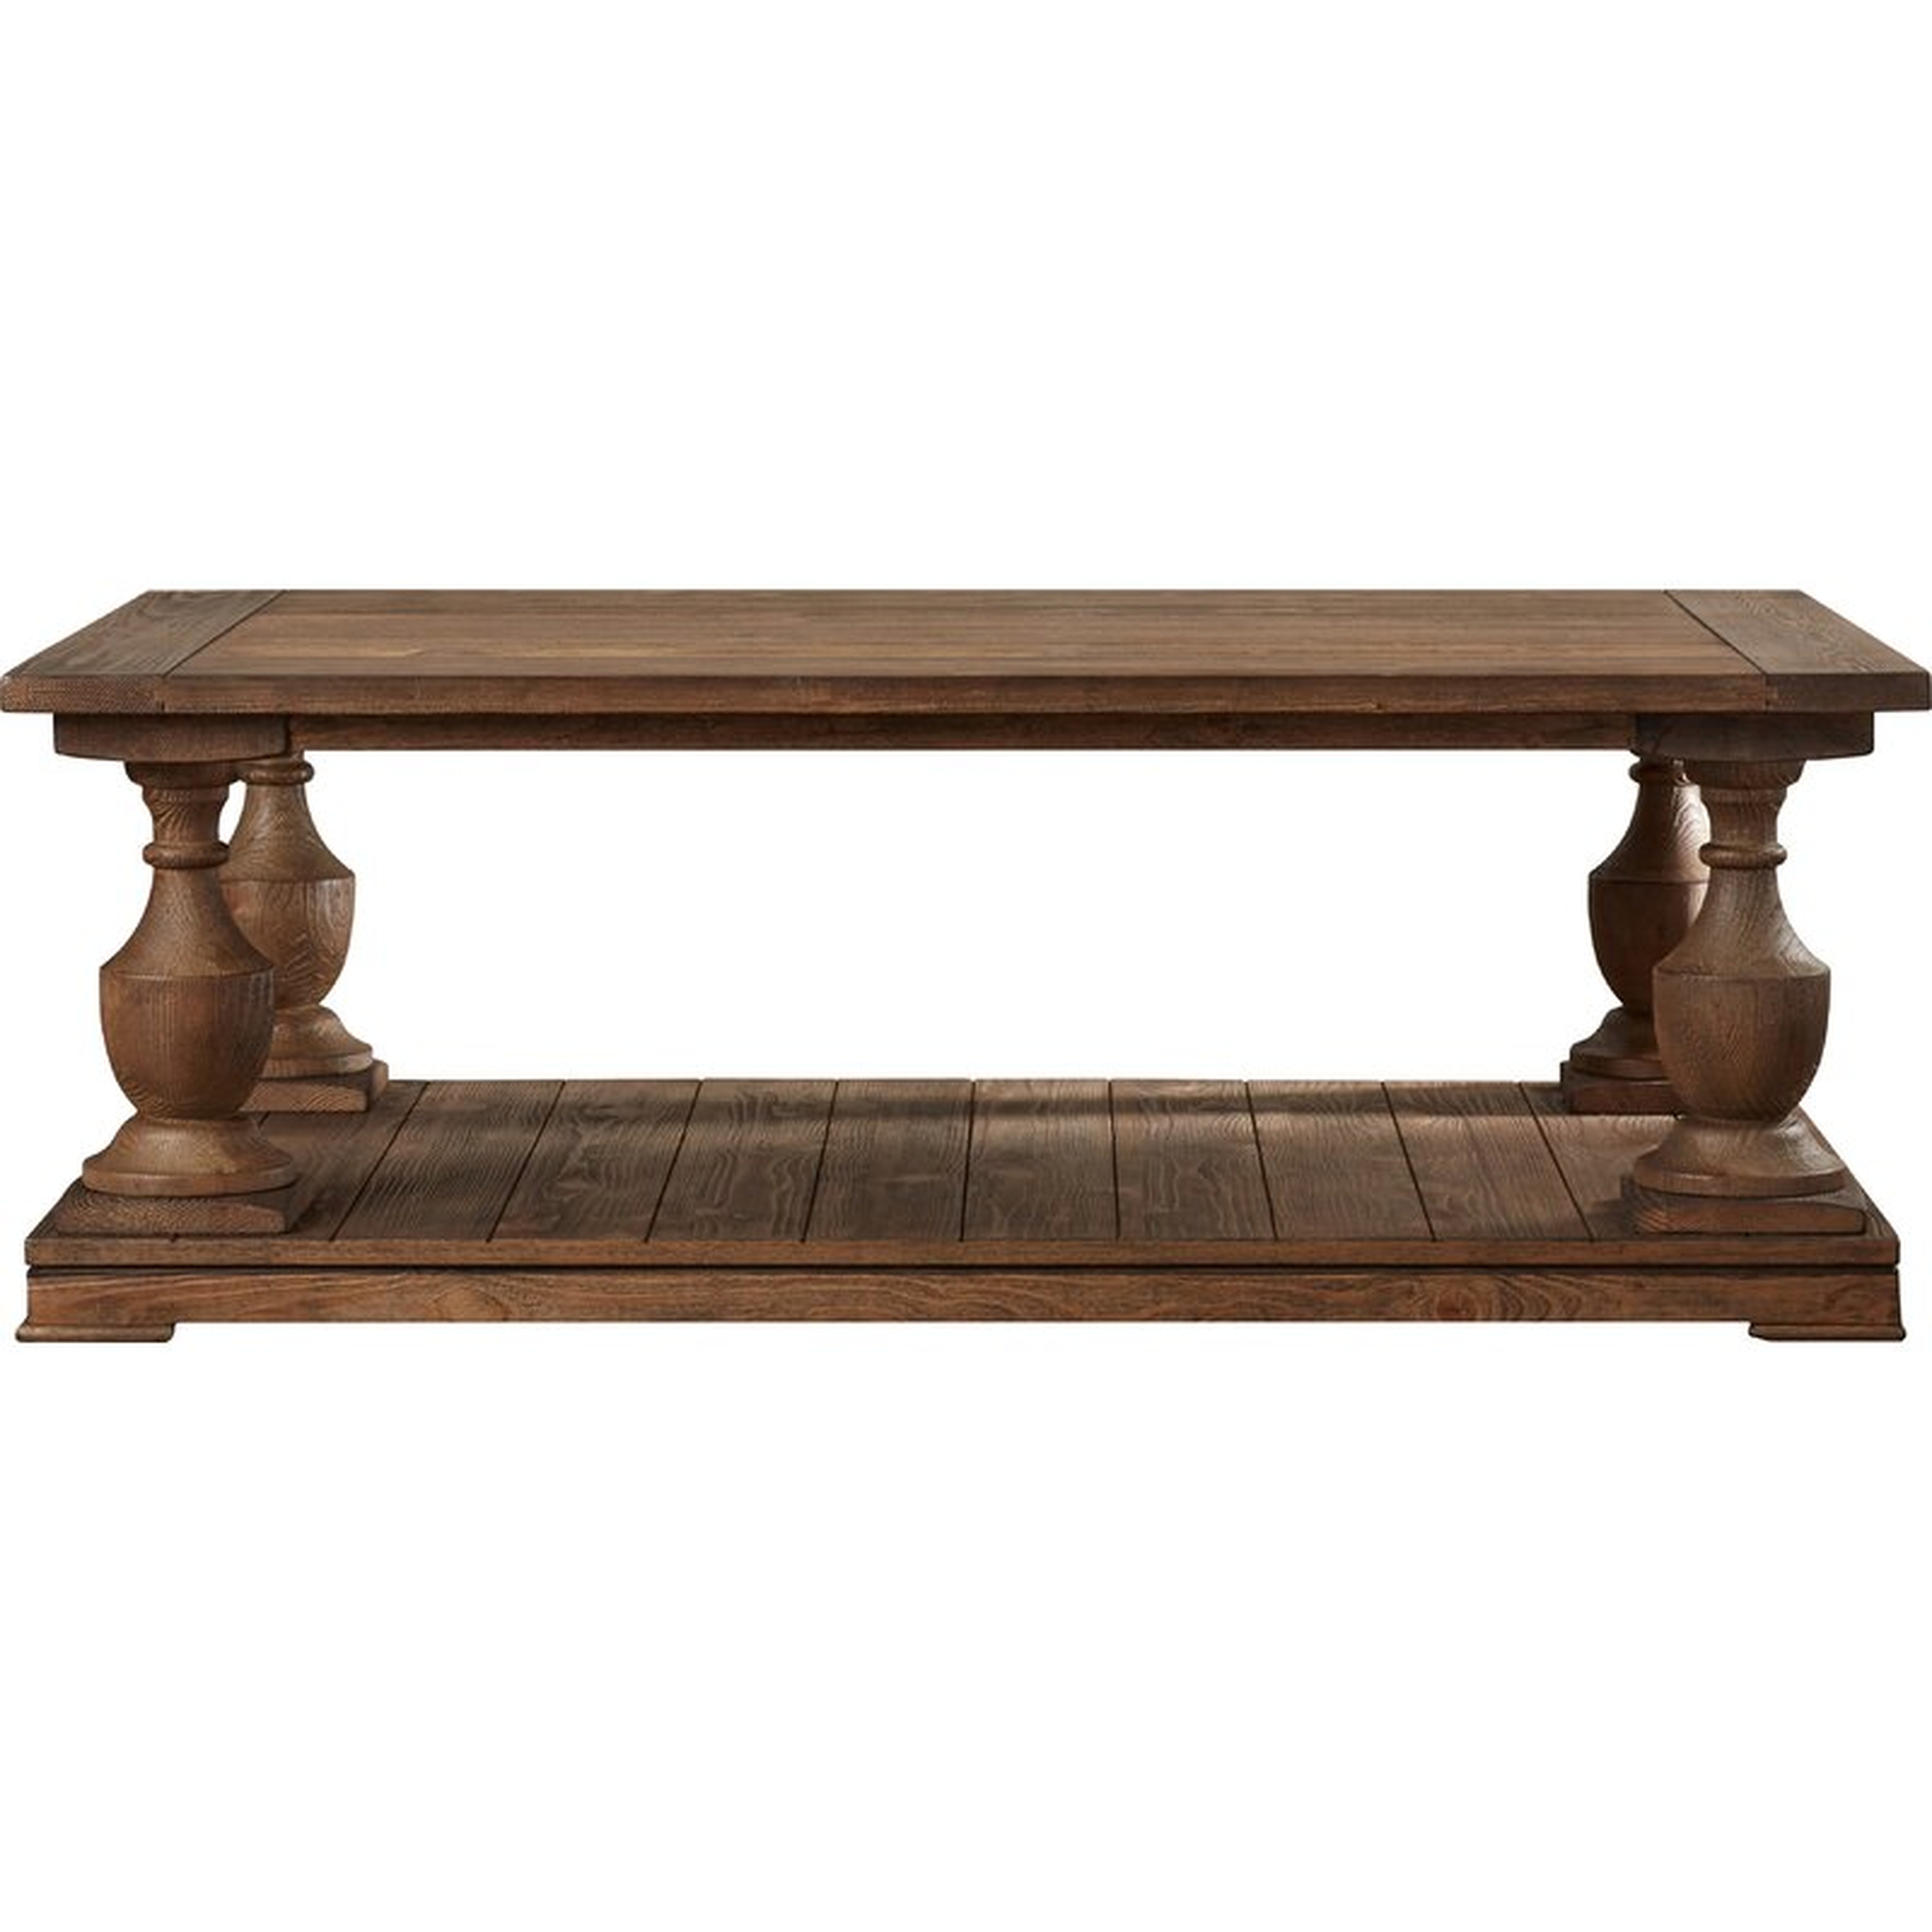 Harlingen Solid Wood Coffee Table with Storage - Birch Lane